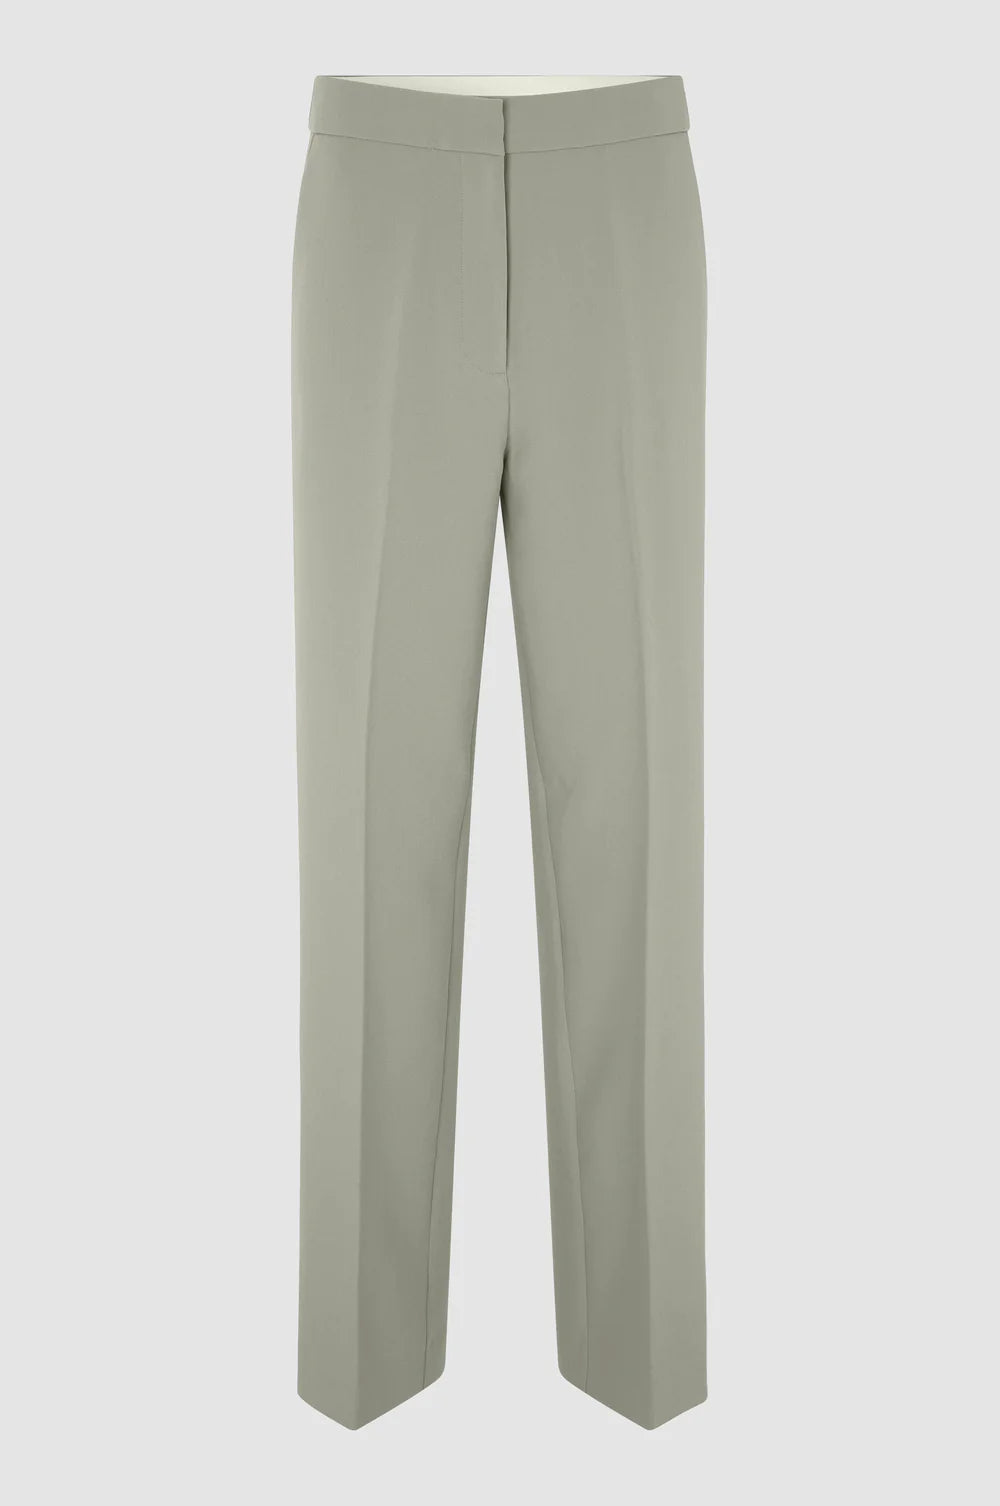 Light green / grey coloured wide leg trousers